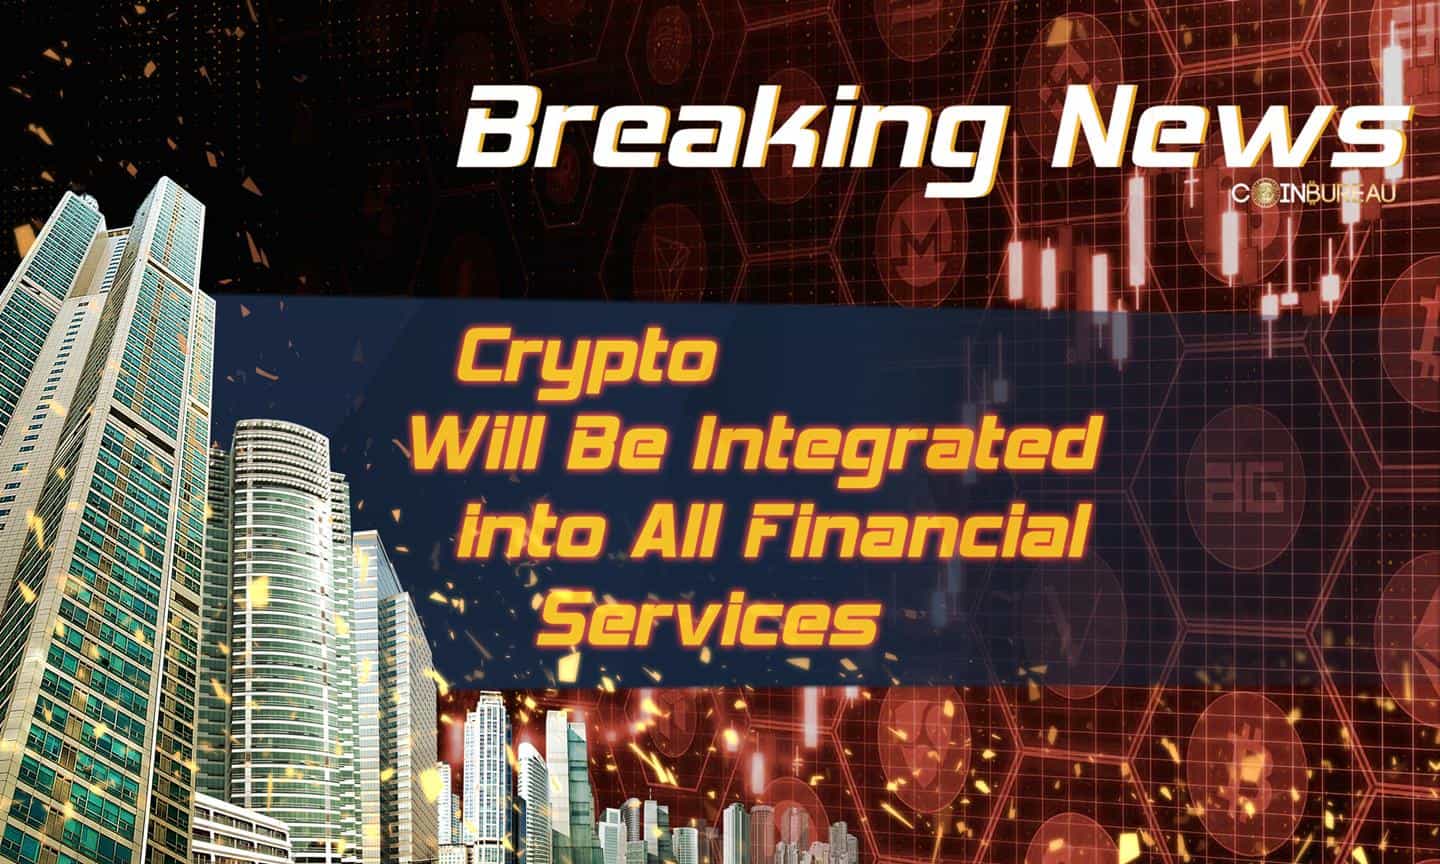 75% of Firms say Crypto and Financial Services will be Integrated